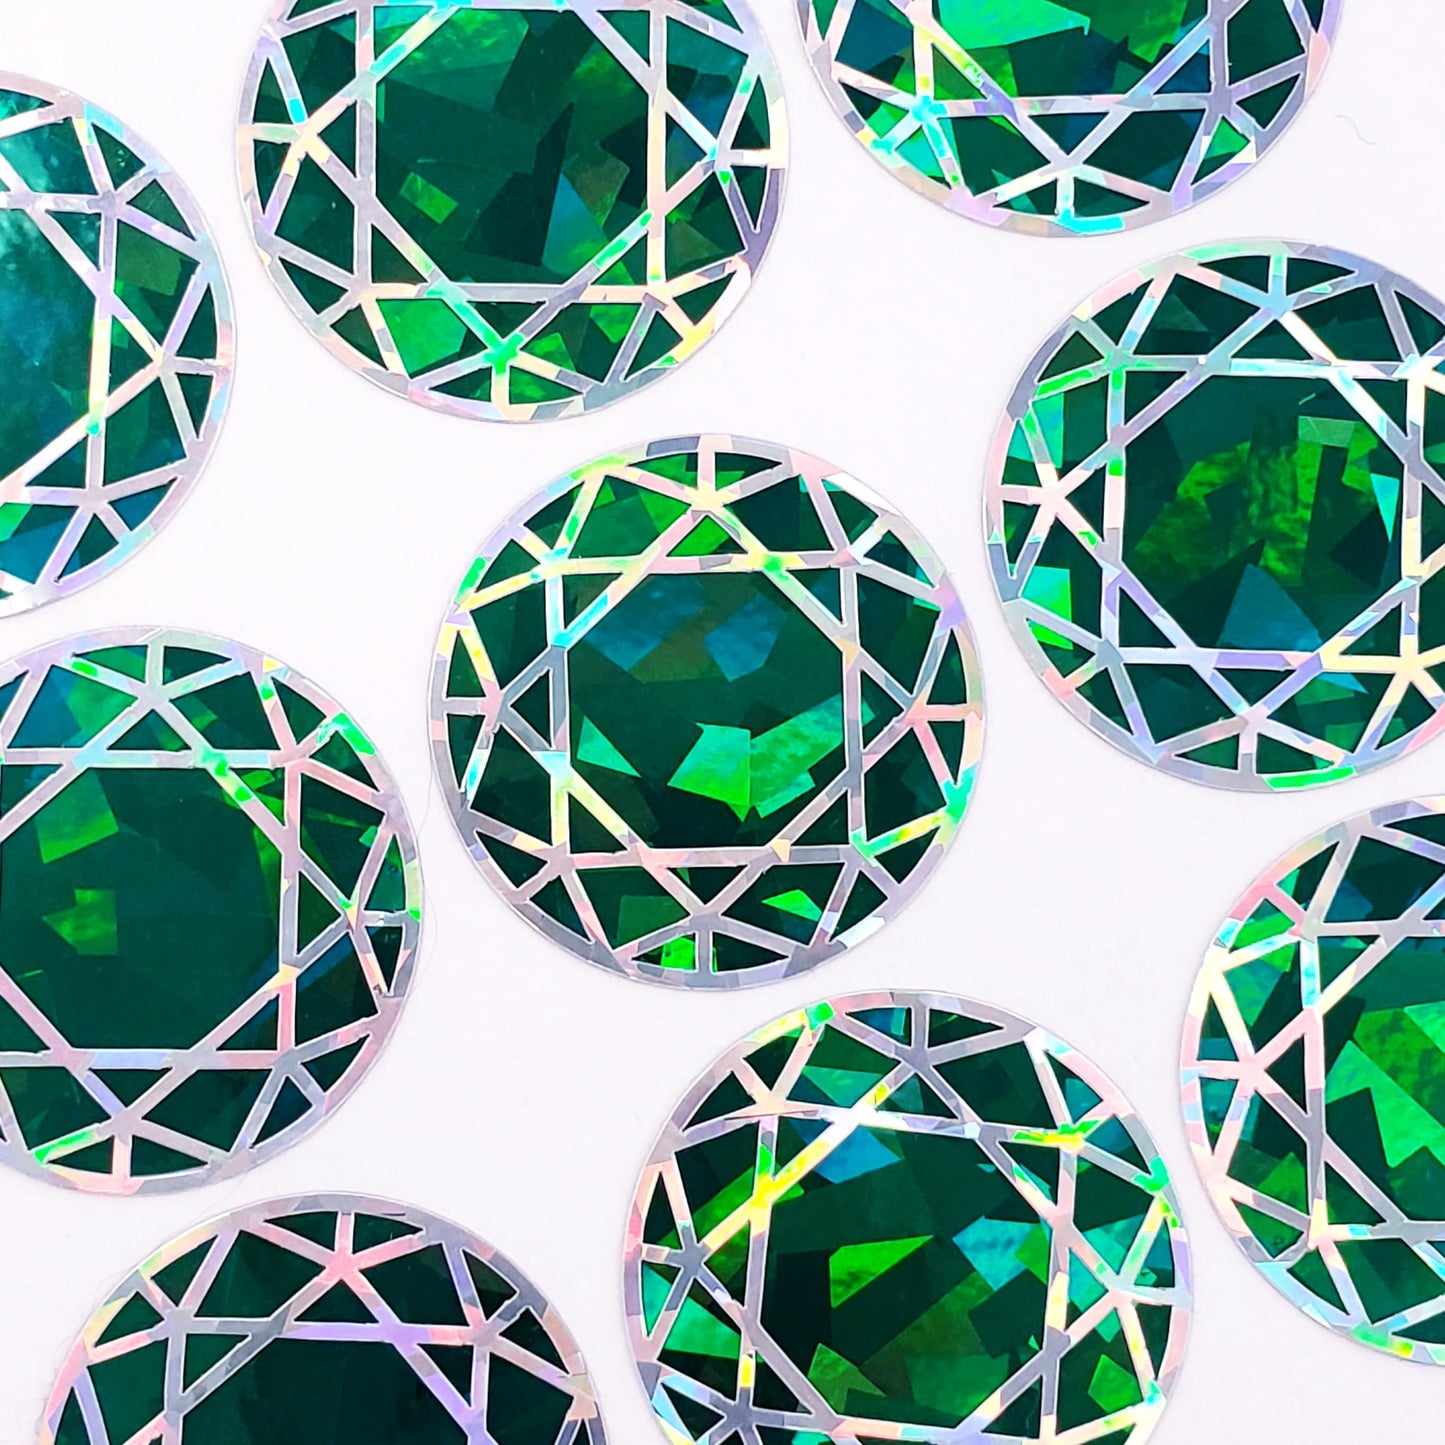 May Birthstone stickers, set of 20 sparkly round dark emerald green decals for gifts, notecards, journals and scrapbook page embellishments.